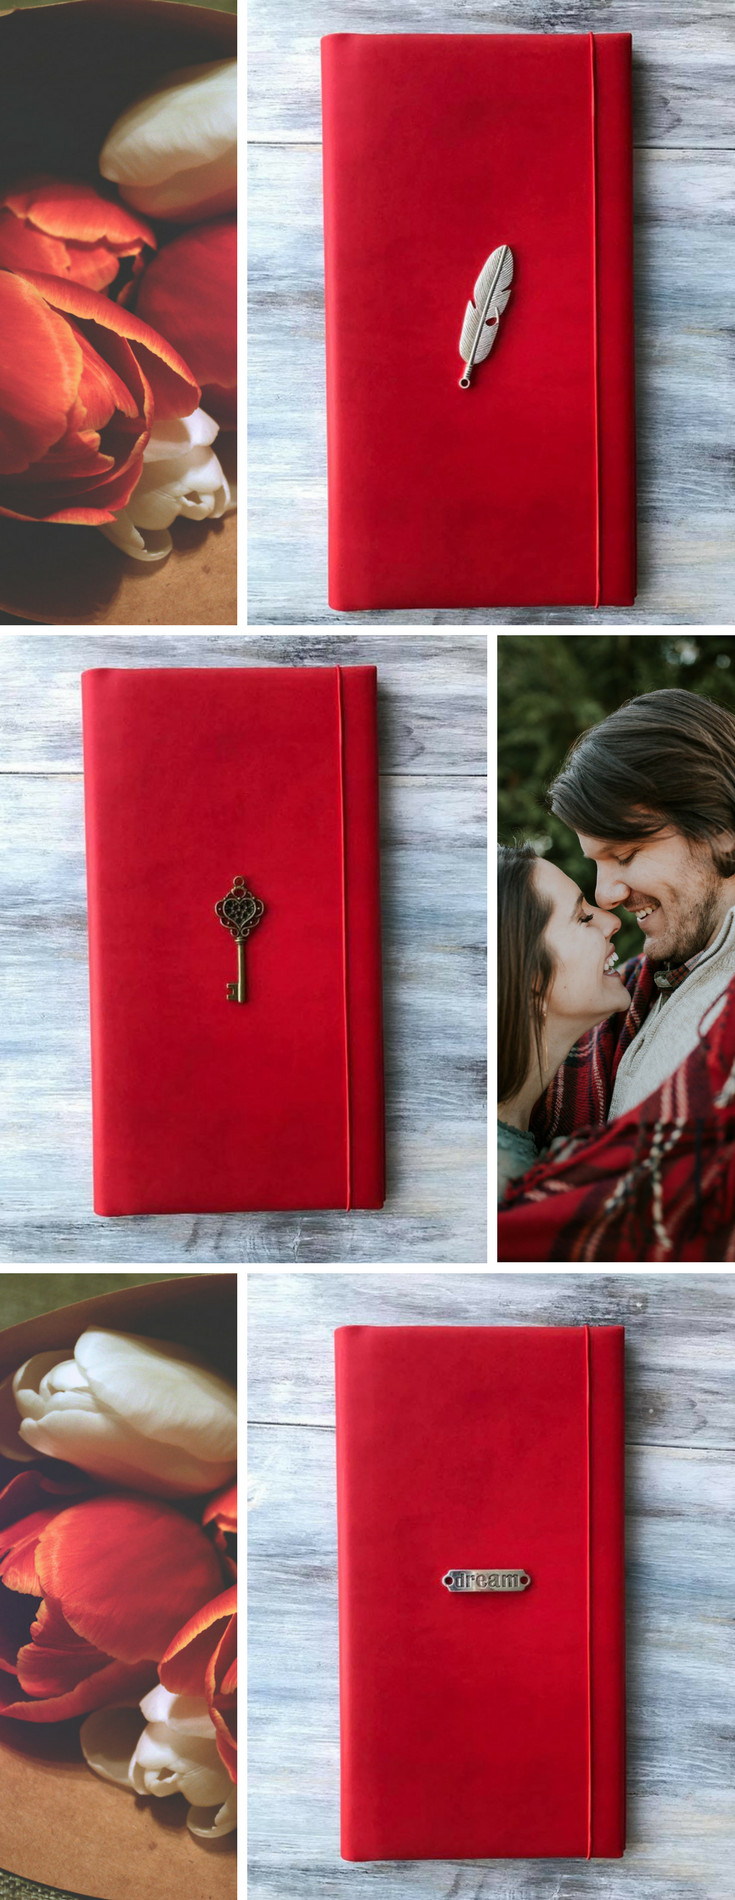 Romantic Gift Ideas For Girlfriend
 IN RED Romantic and Inexpensive Gift Ideas for Your